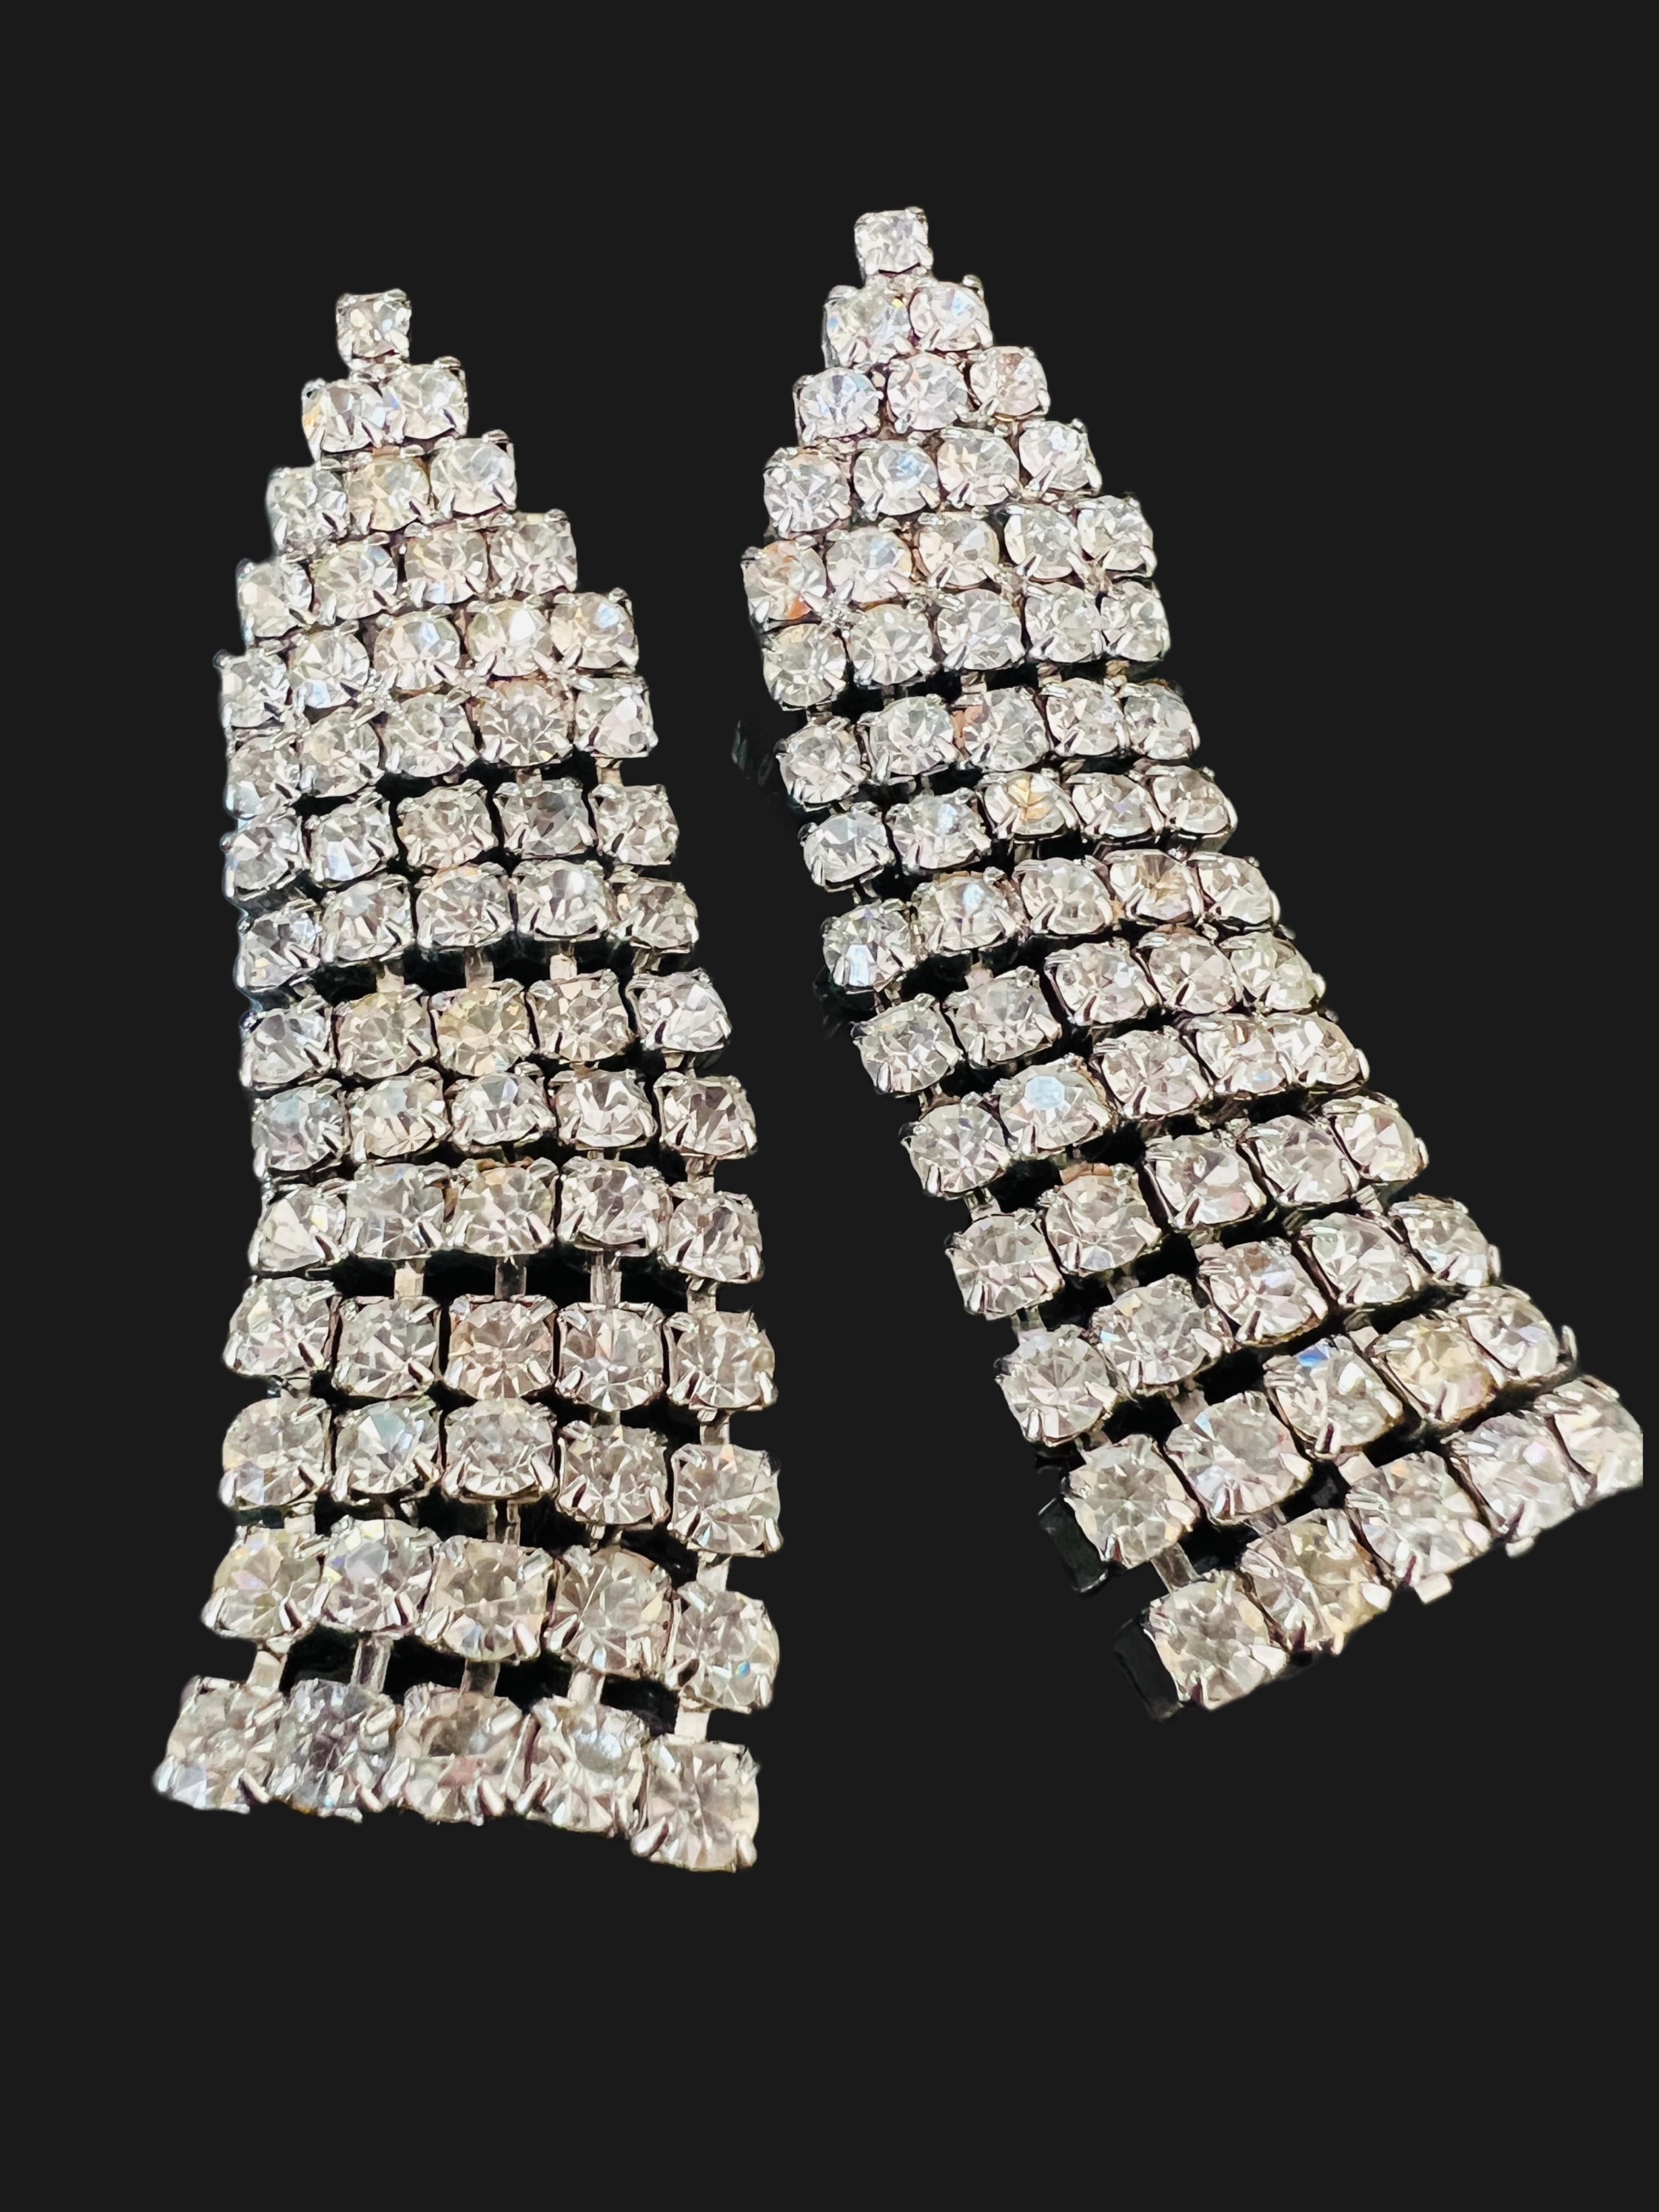 These captivating vintage Hollywood glam long dangle earrings, adorned with shimmering prong-set rhinestones encased in silver plating, feature a dramatic length of over 3 inches, guaranteeing an impressive and attention-grabbing allure.

Size: